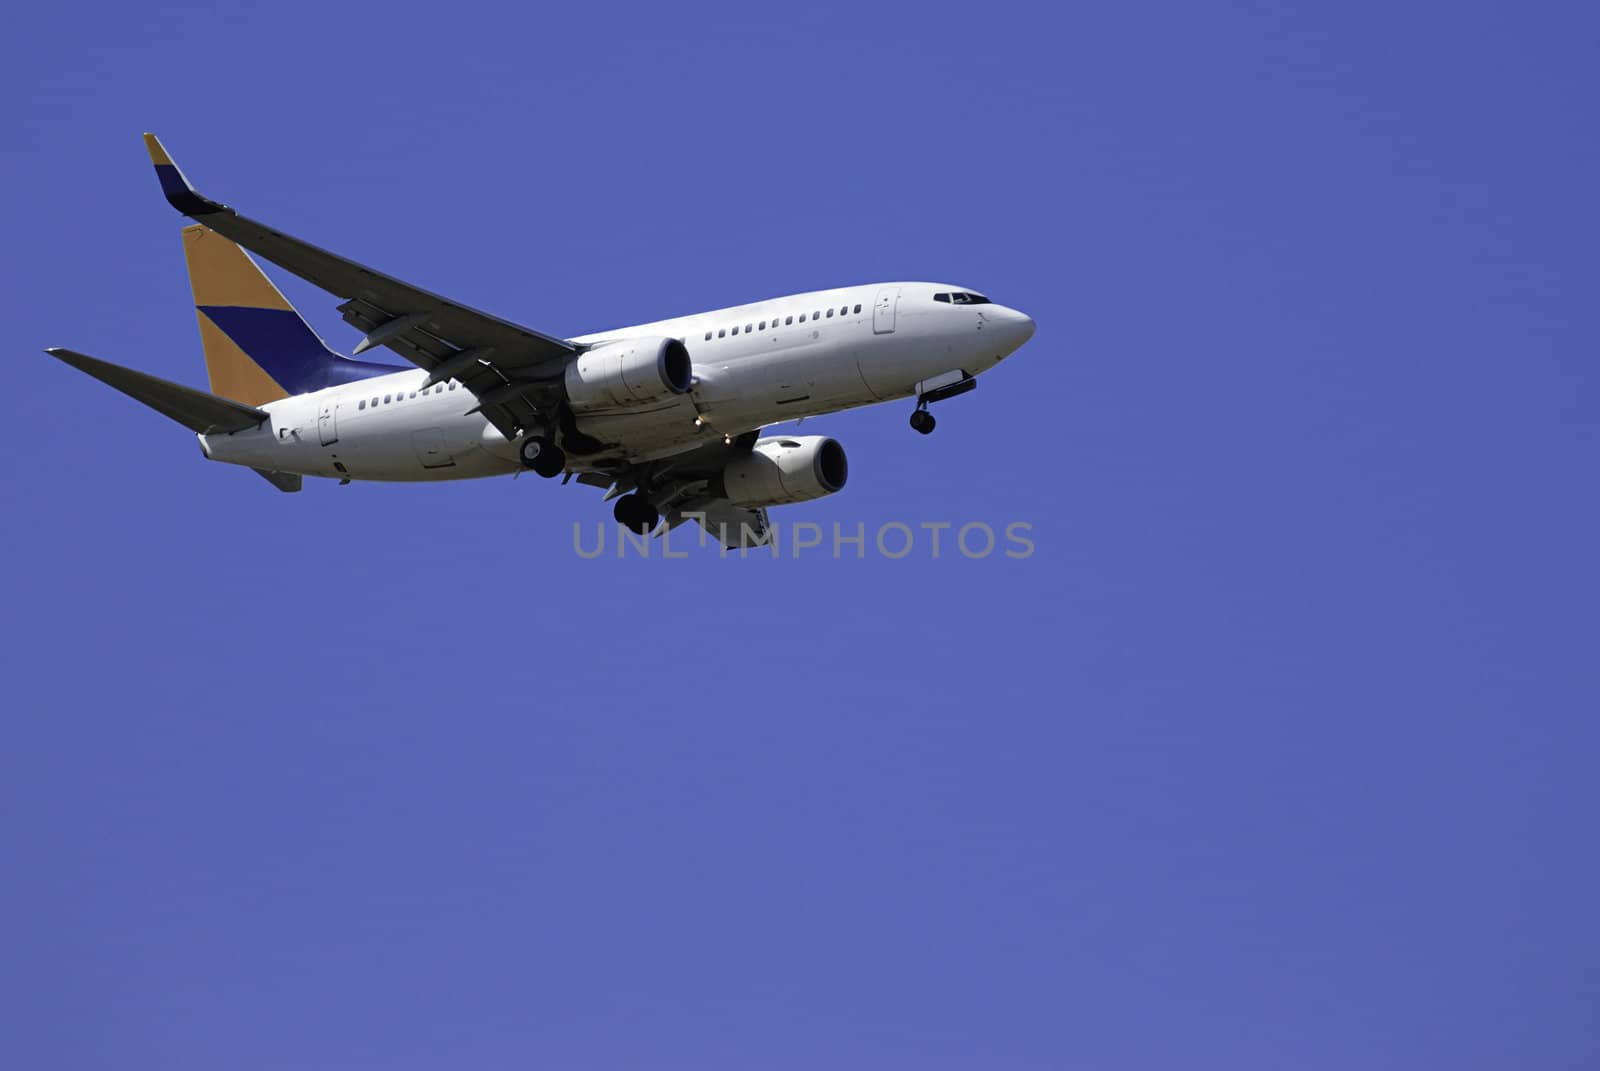 A large jet landing with its gear down, shot against a blue sky - color scheme and design changed